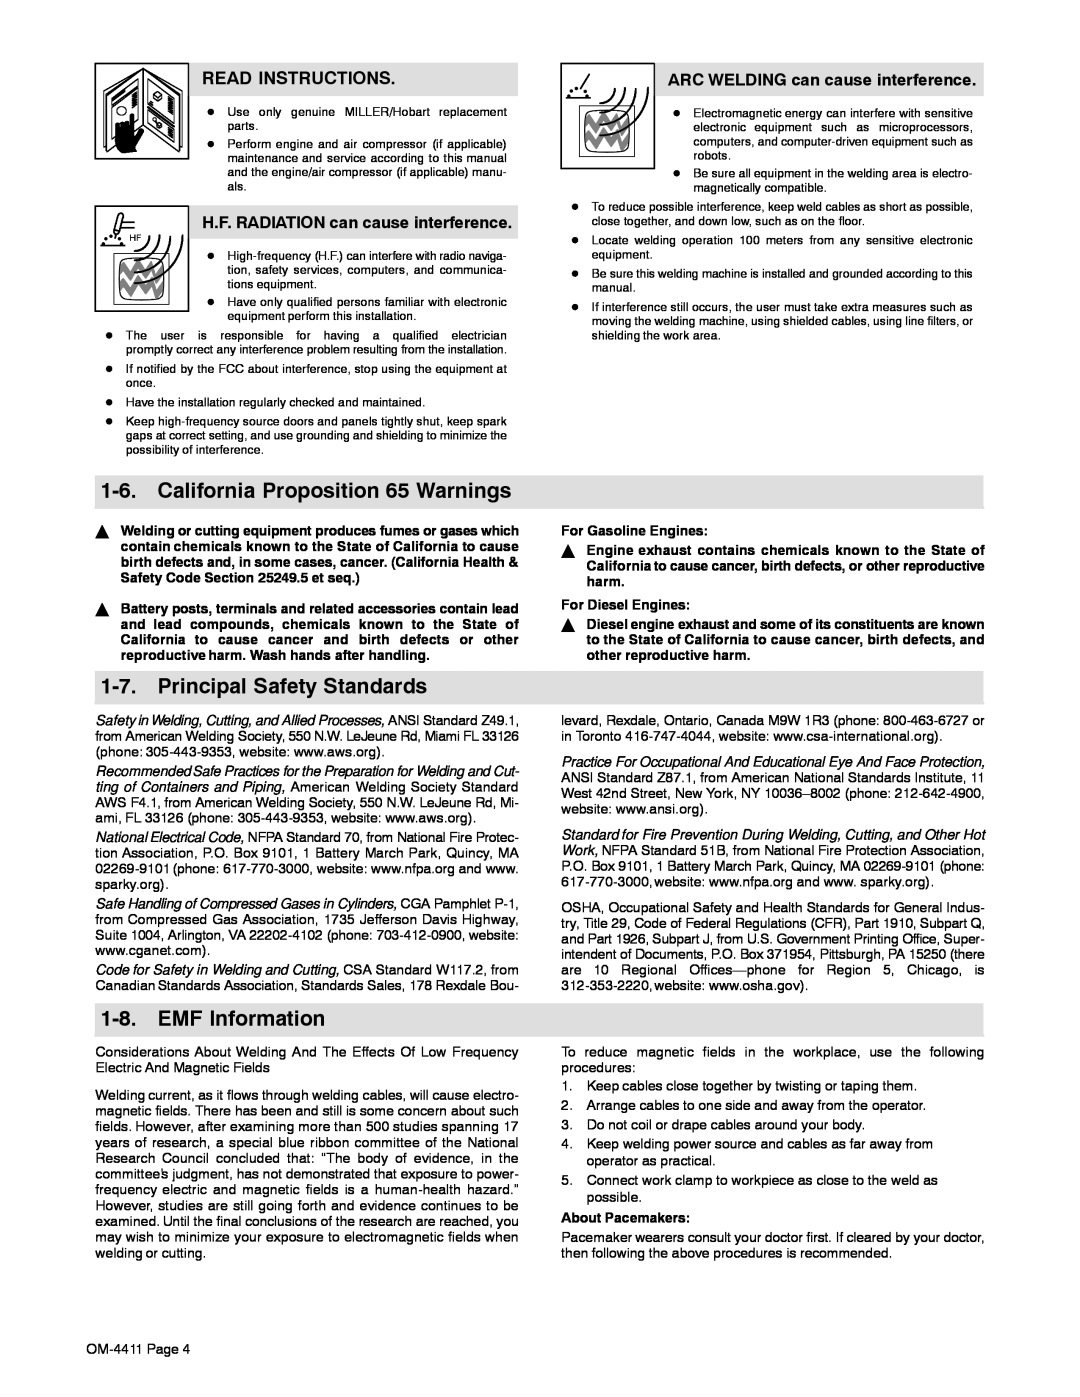 Miller Electric 301 G California Proposition 65 Warnings, Principal Safety Standards, EMF Information, Read Instructions 